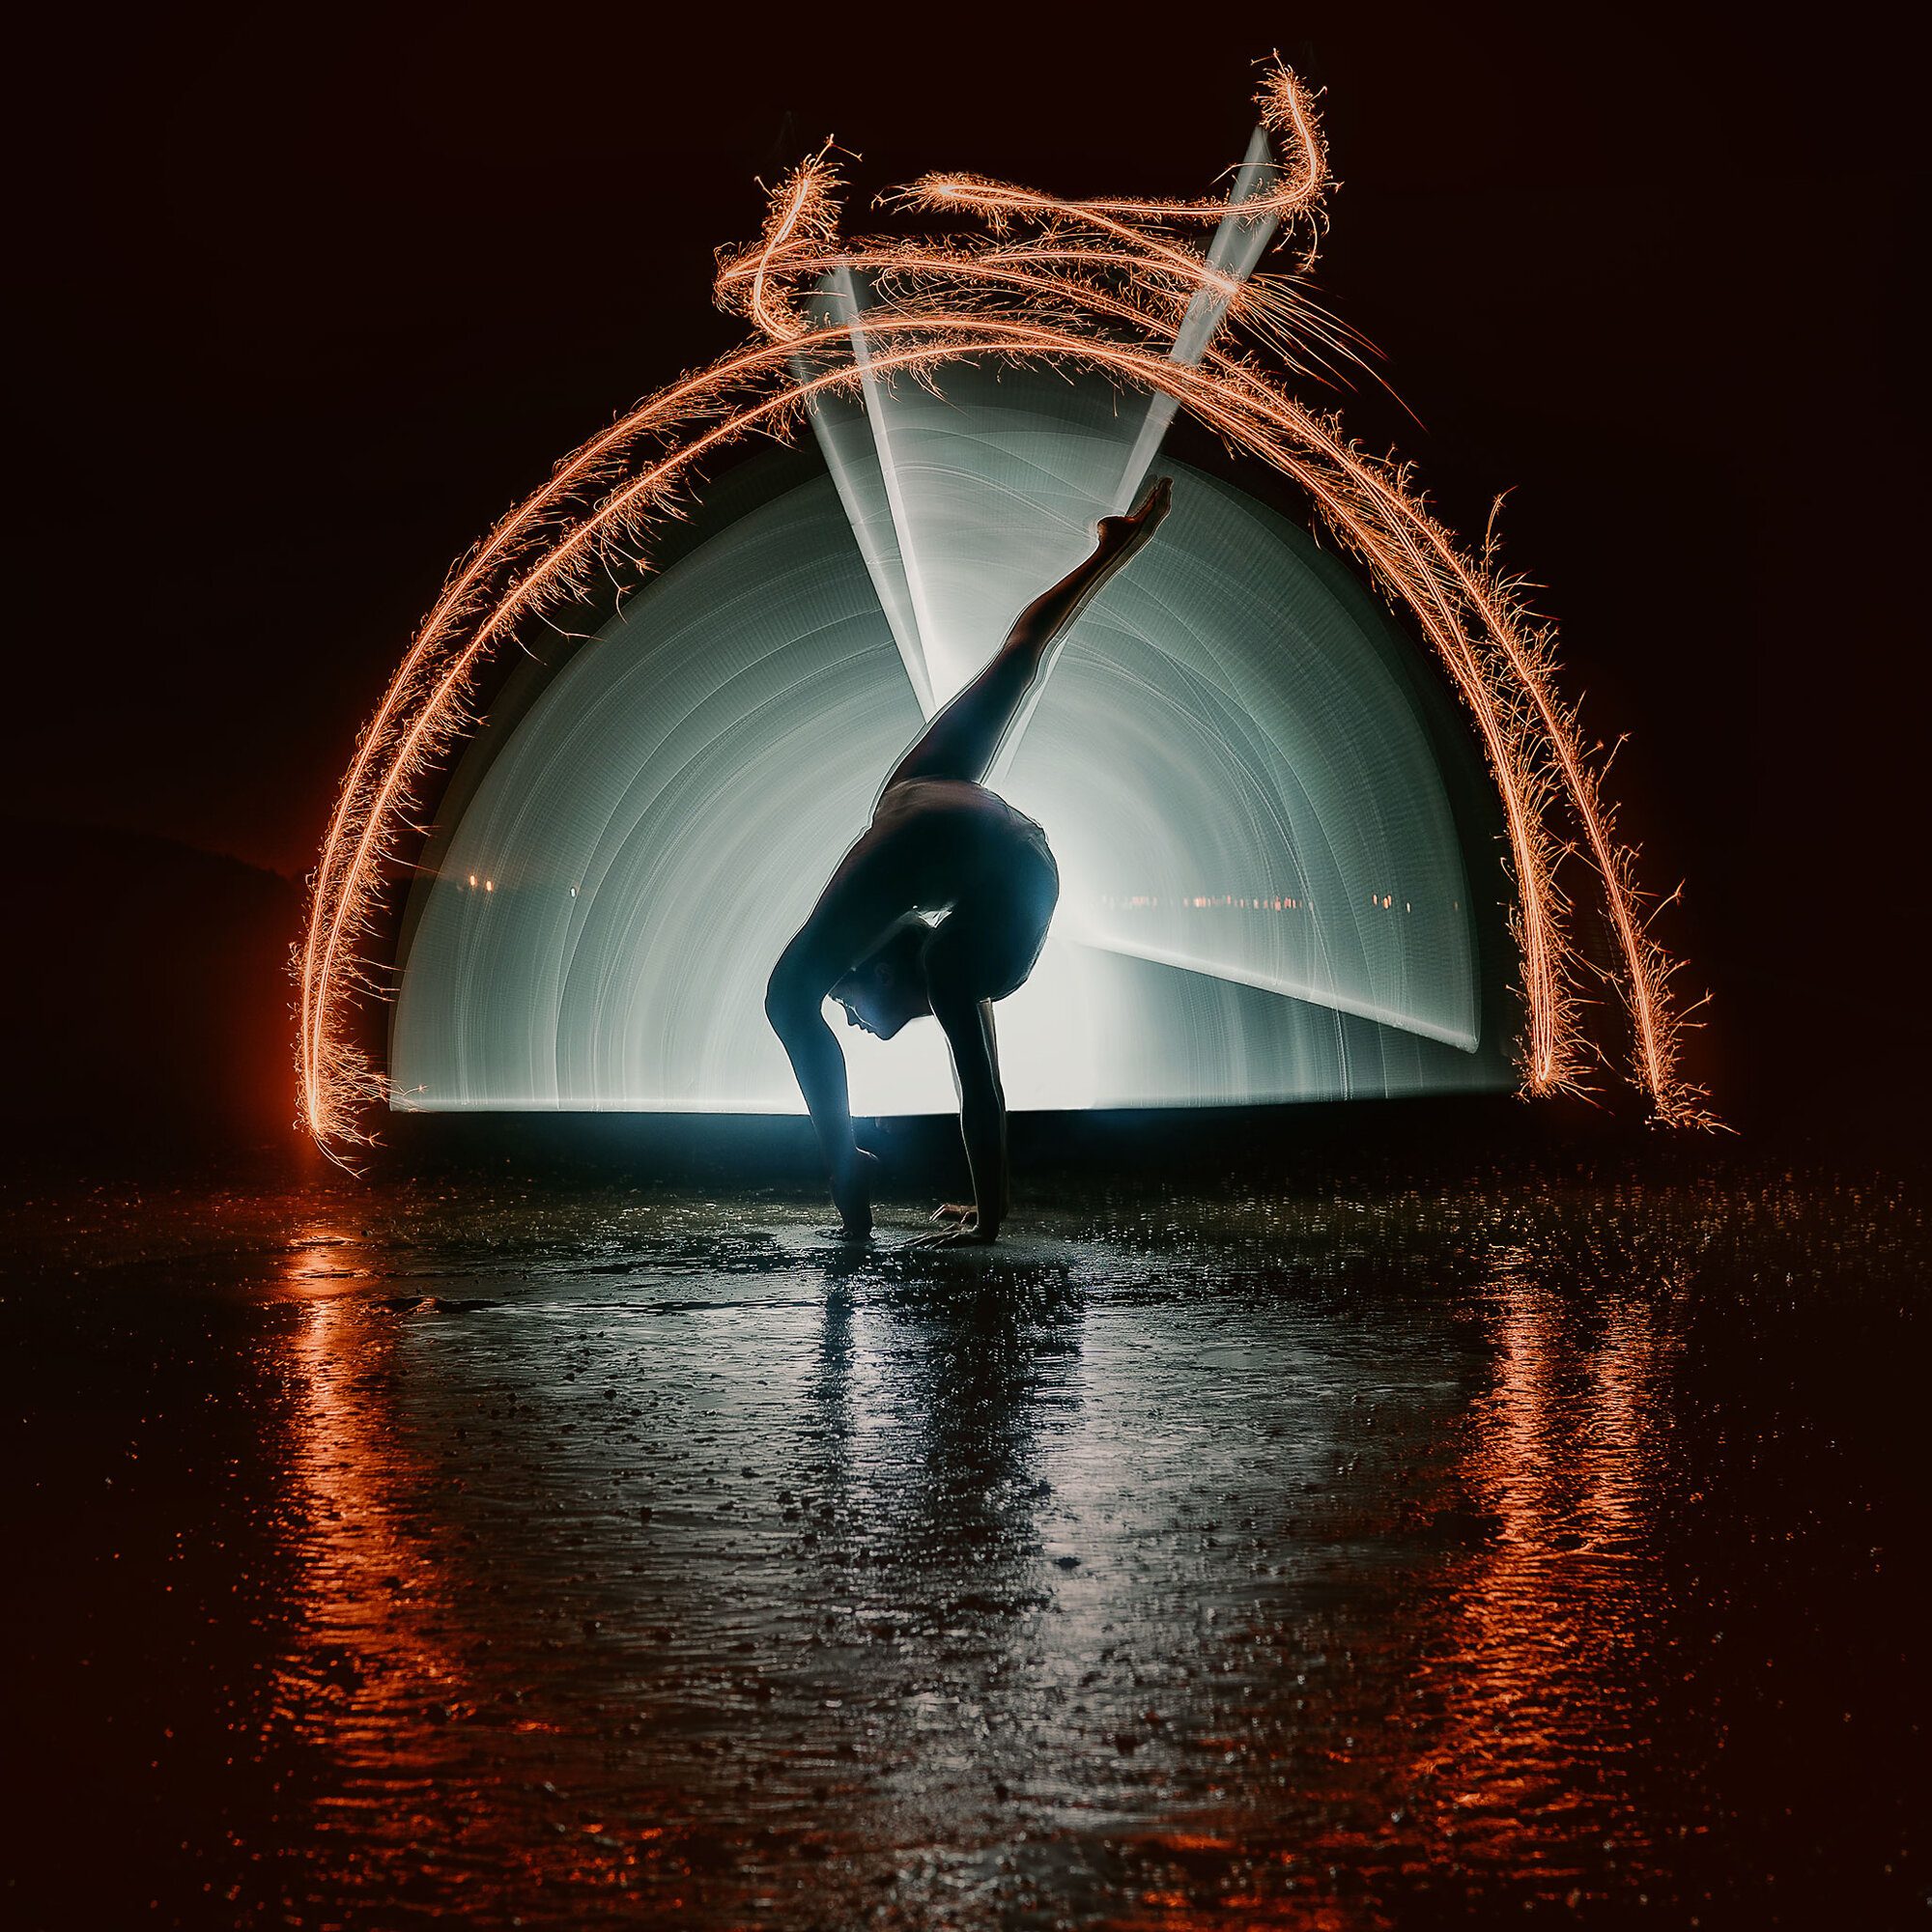 acrobatic performer on the beach at night with light painting